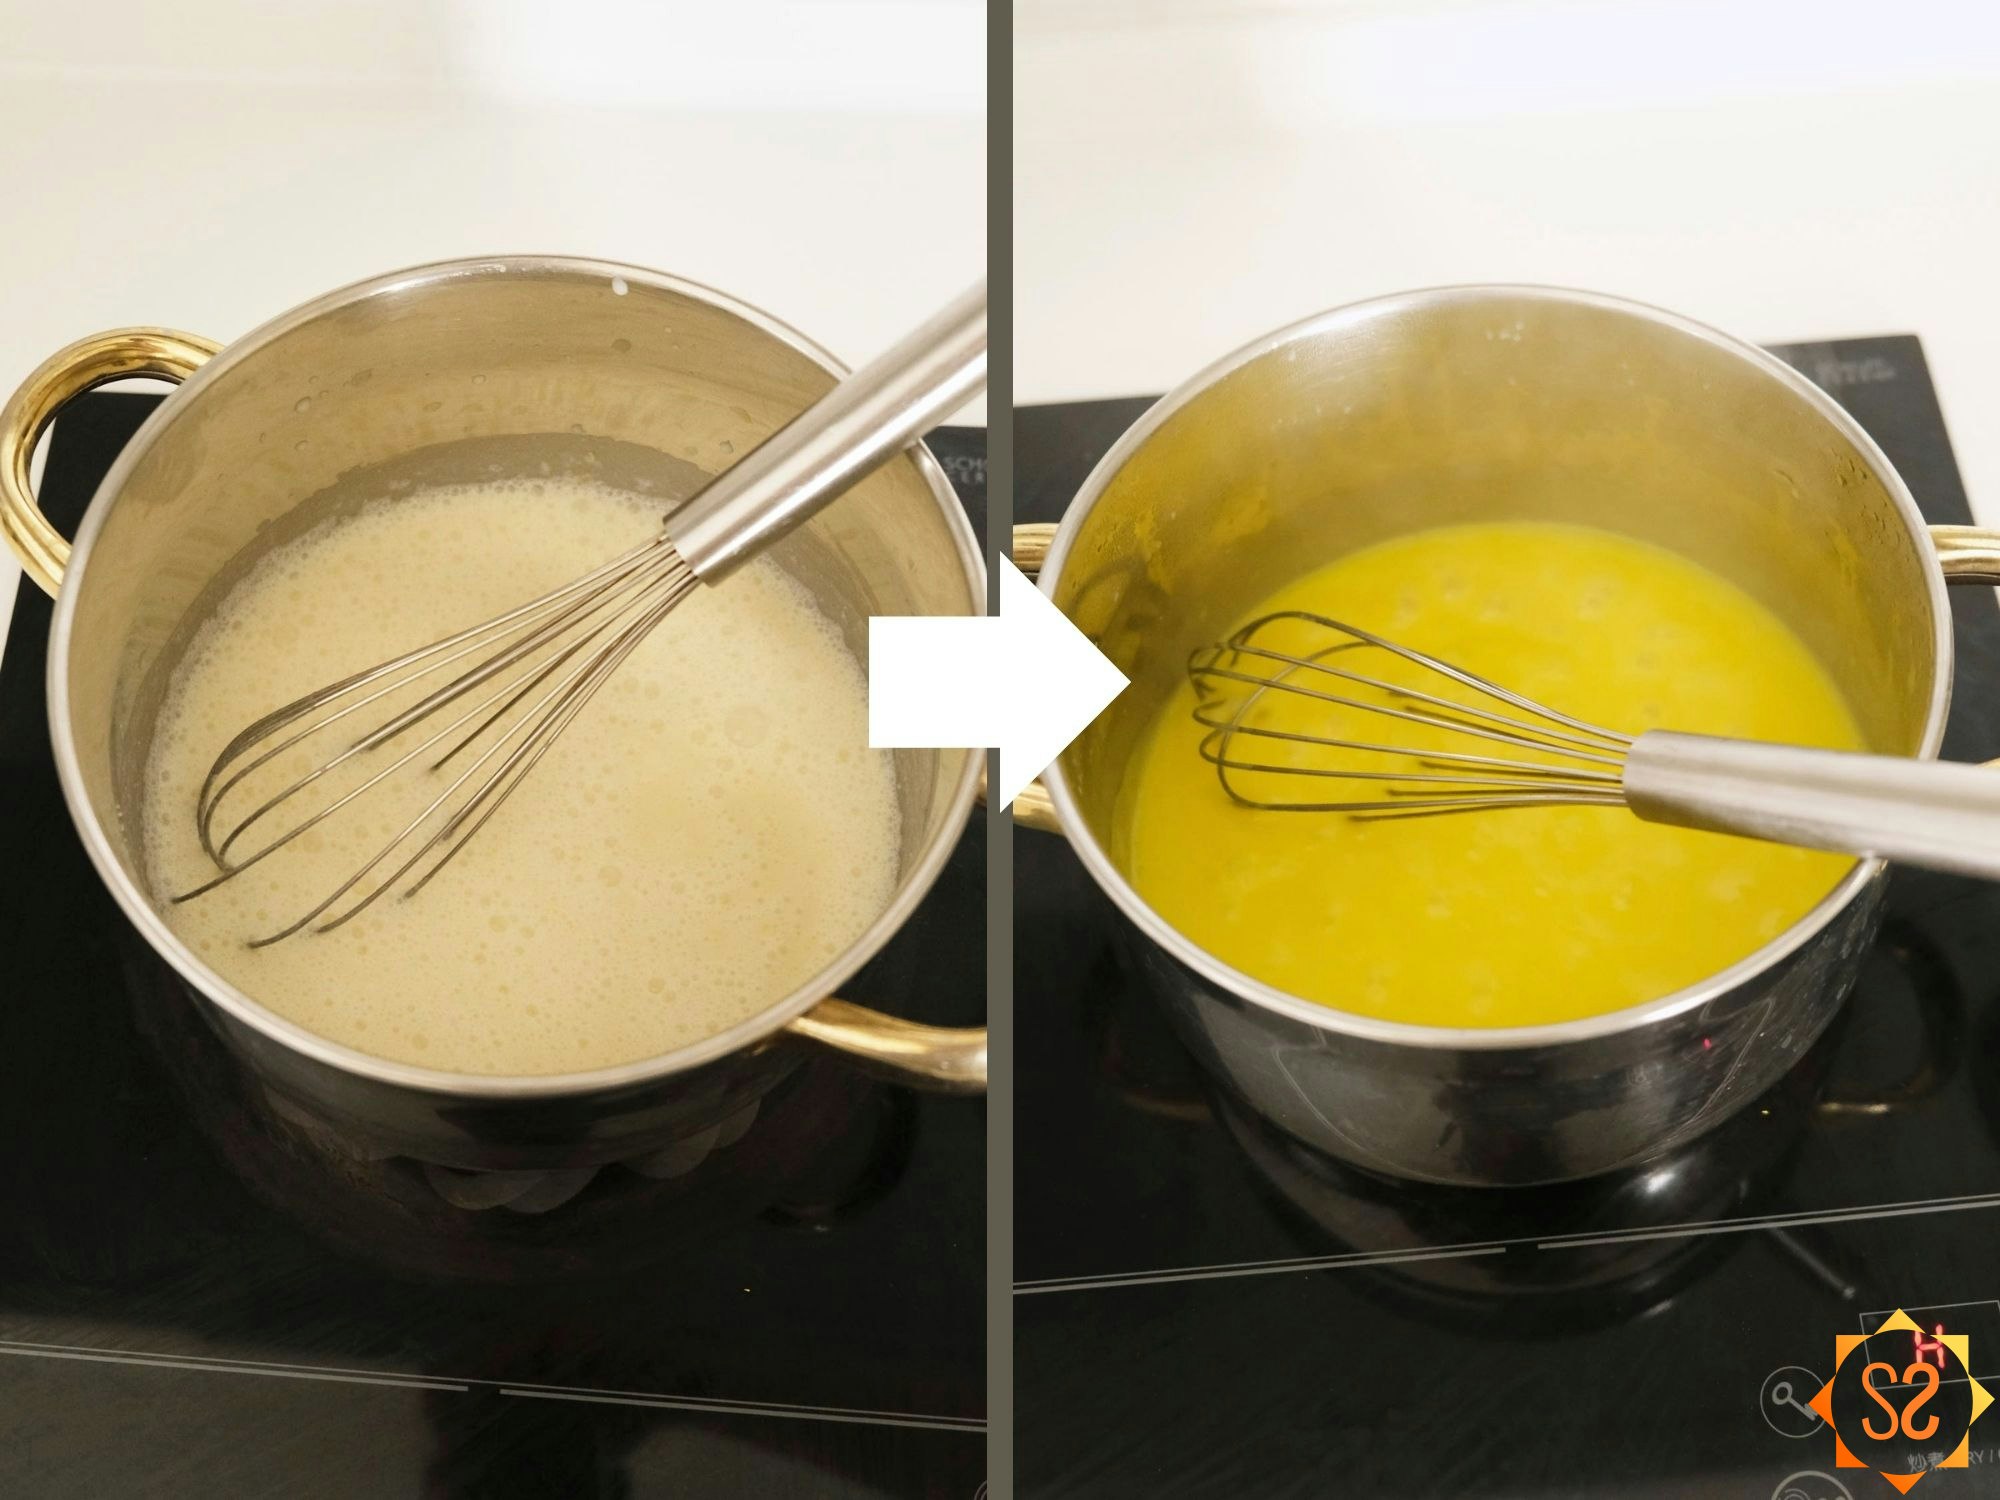 Two images: 1. The lemon curd ingredients mixed in a saucepan before heating, 2. The lemon curd ingredients fully cooked in a saucepan.